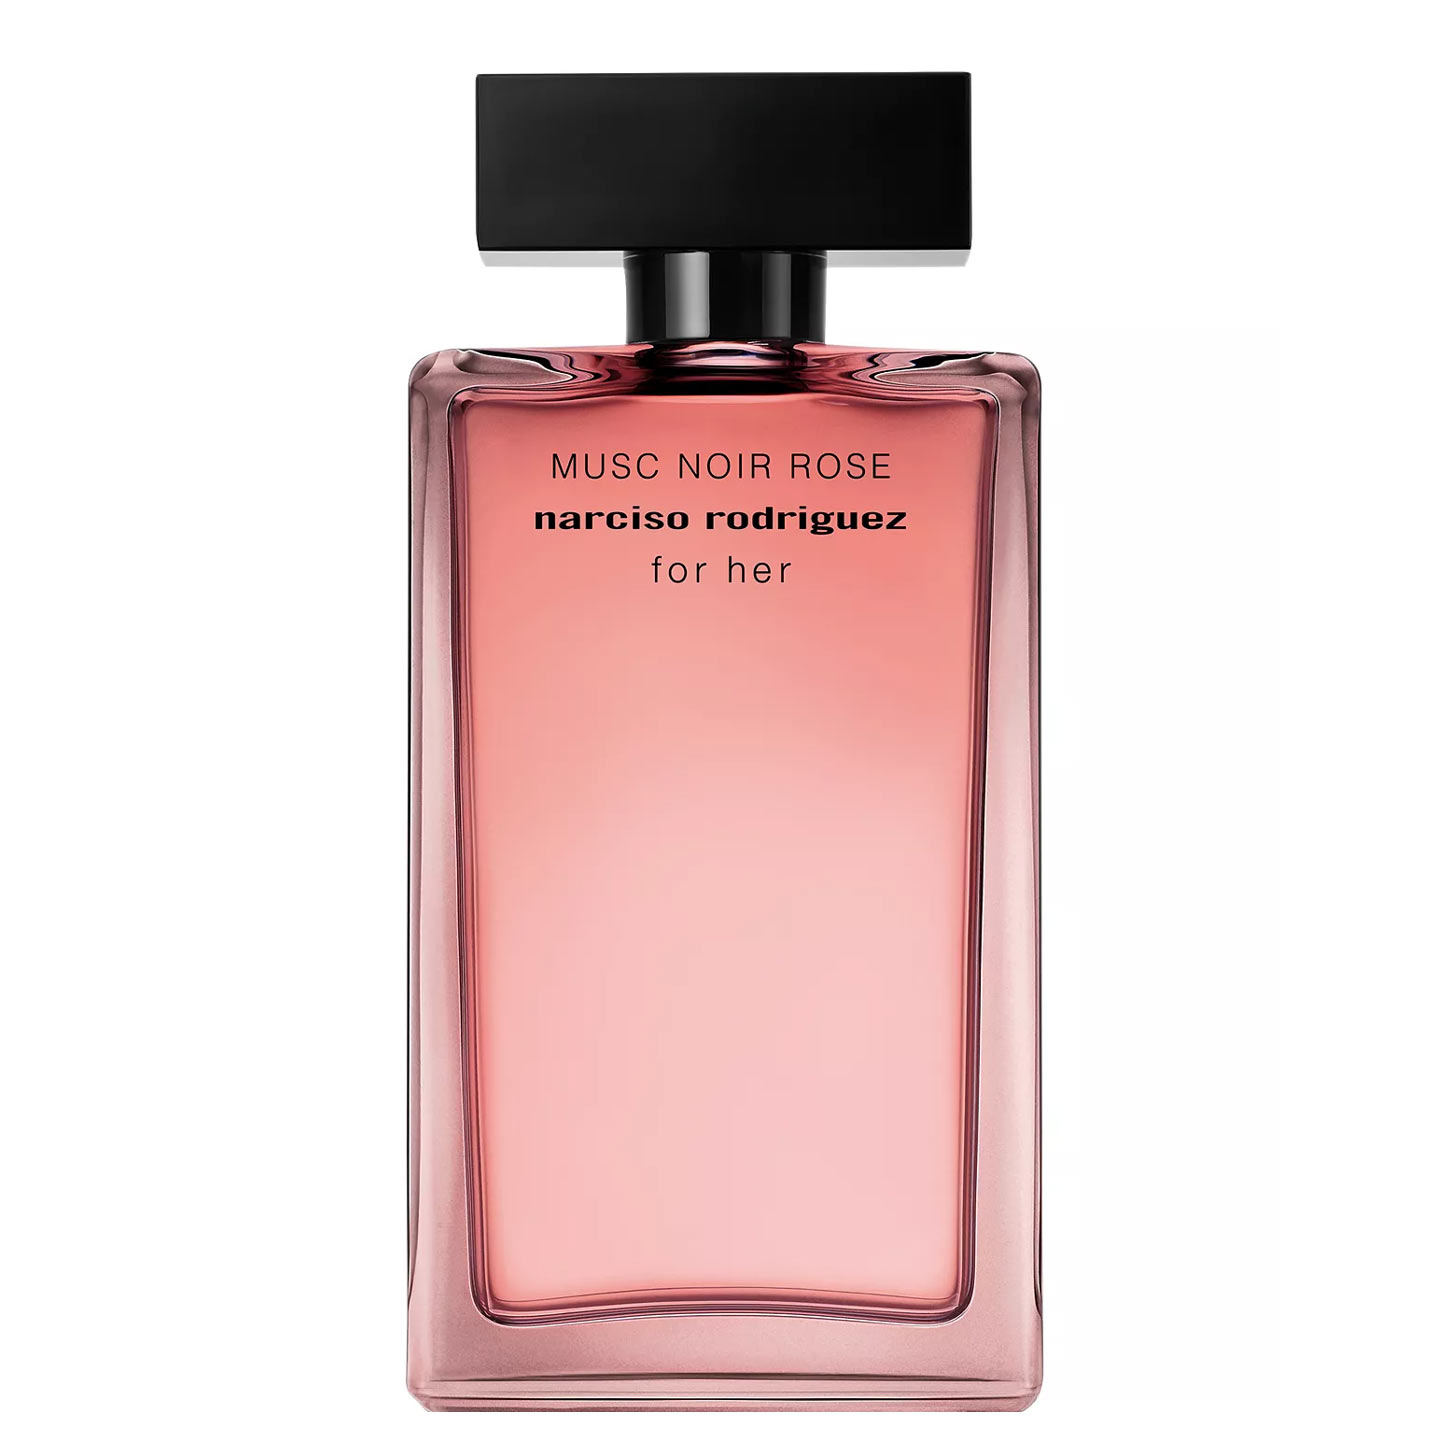 Musc Noir Rose For Her Narciso Rodriguez Image